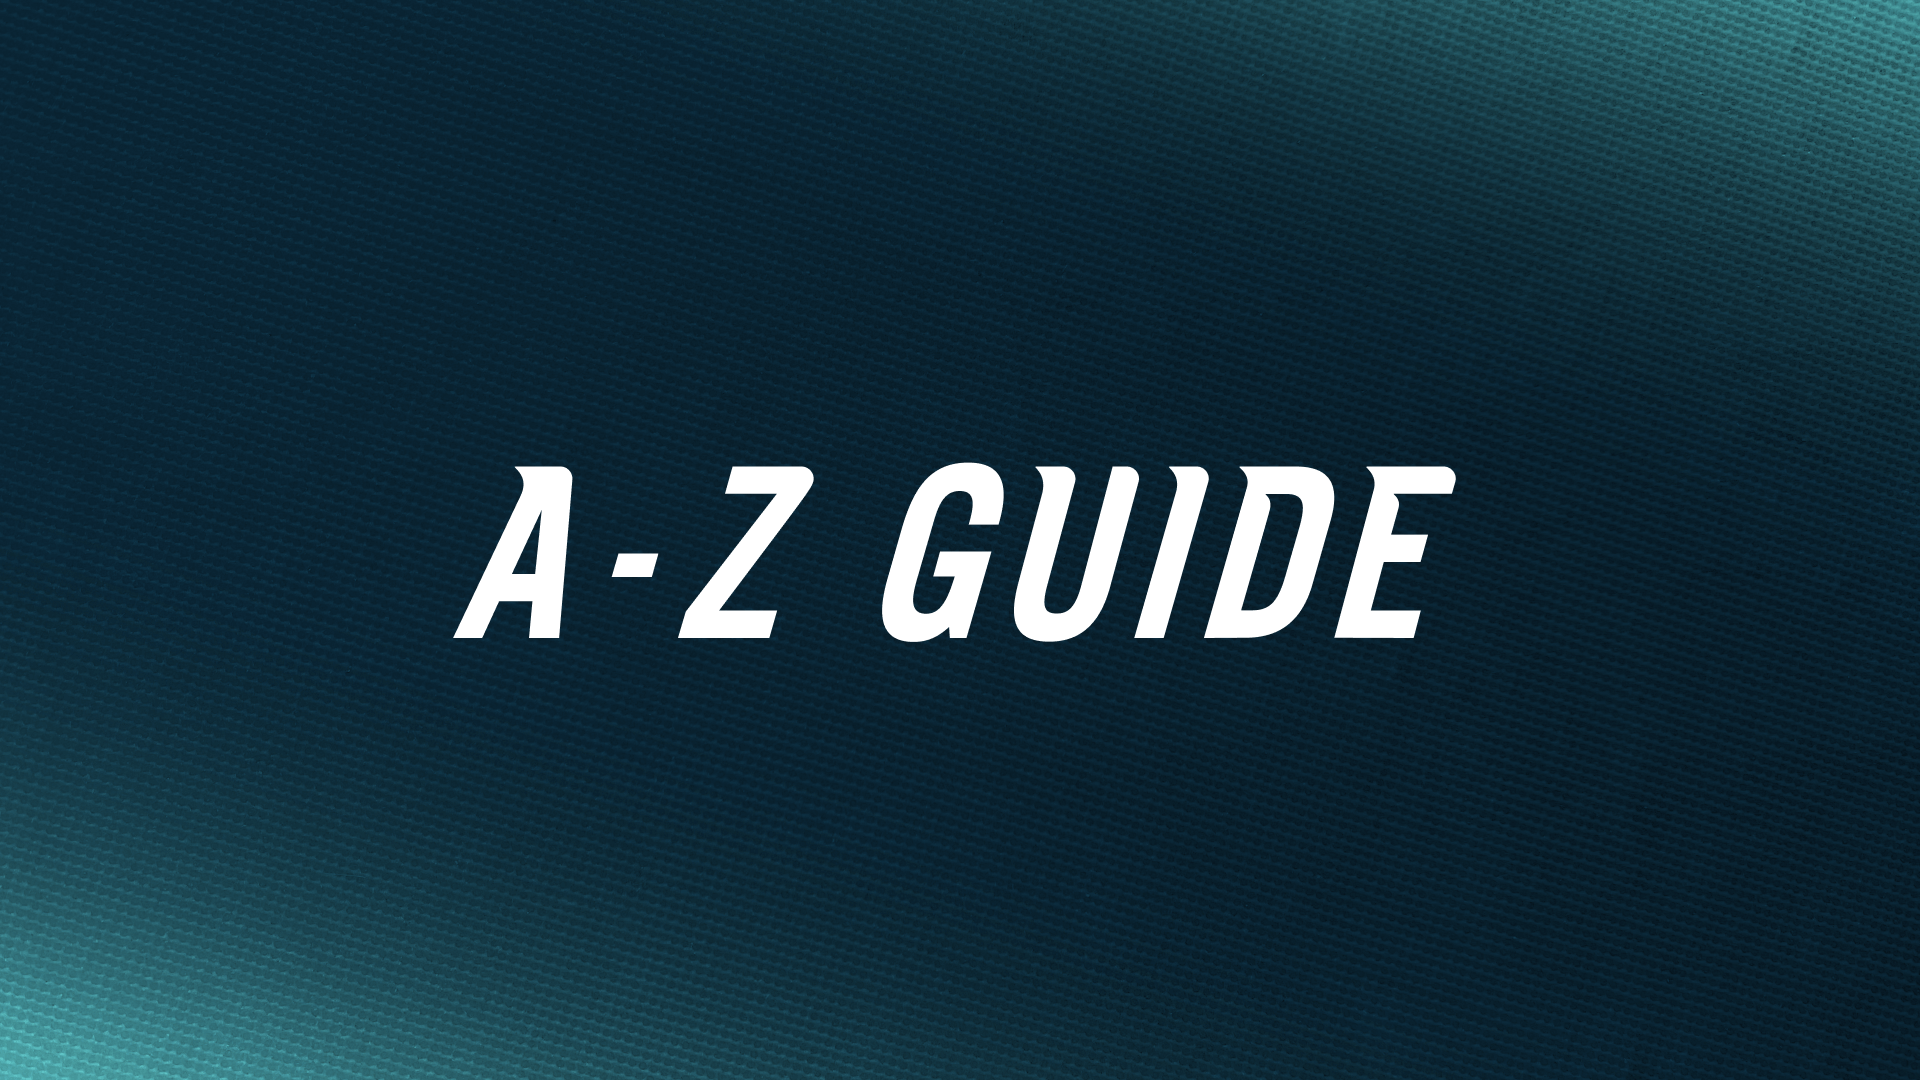 A graphic with the text "A-Z Guide" on a navy background.